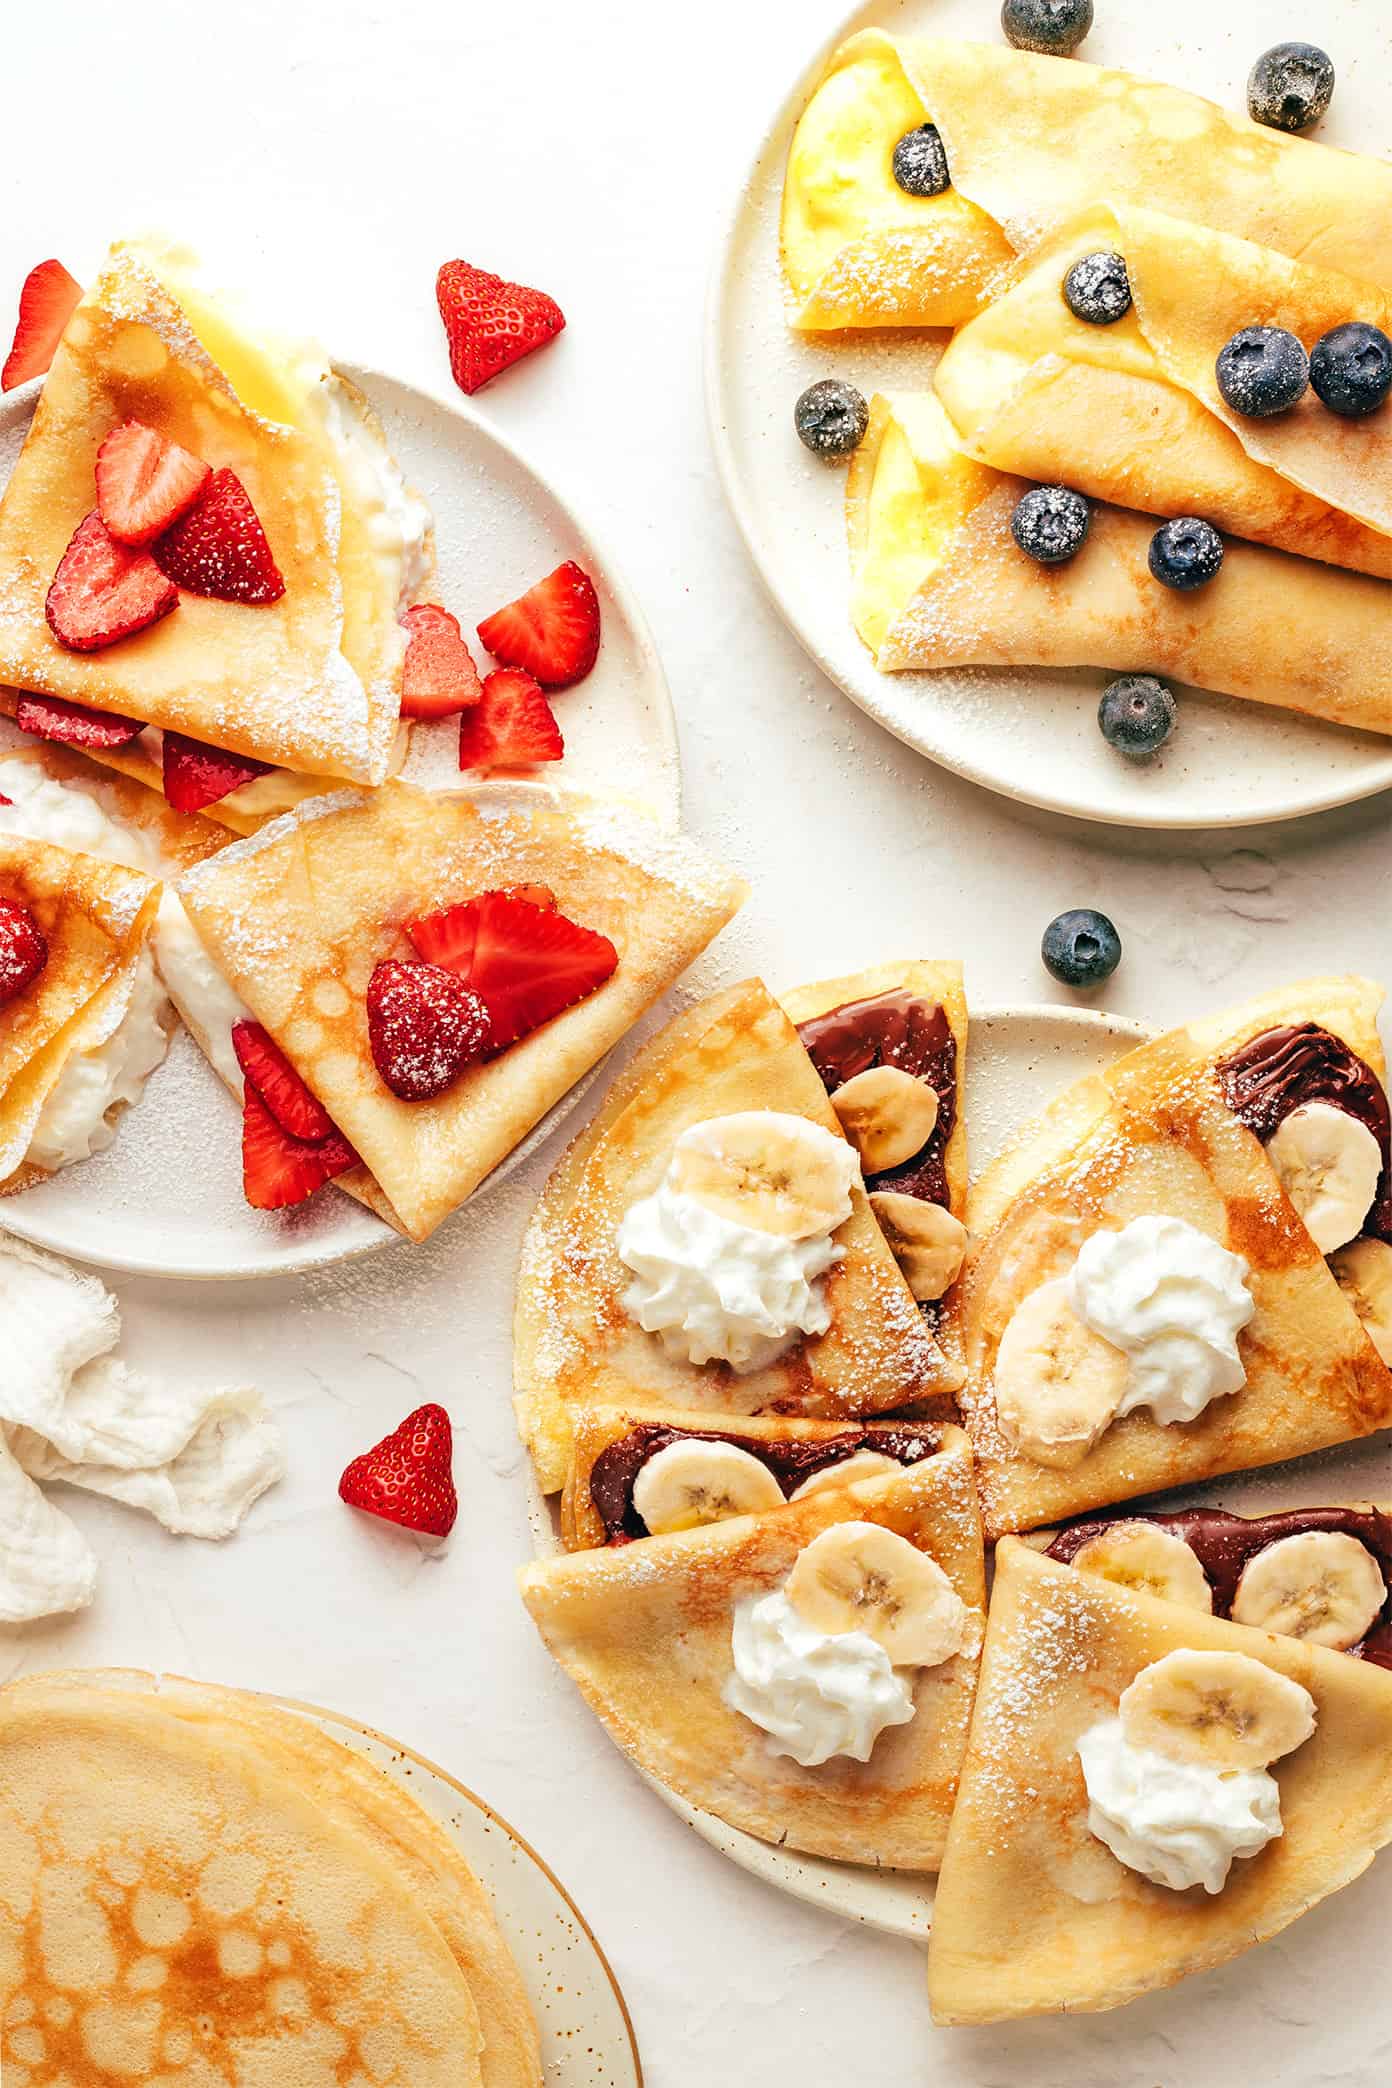 Assortment of homemade crepes